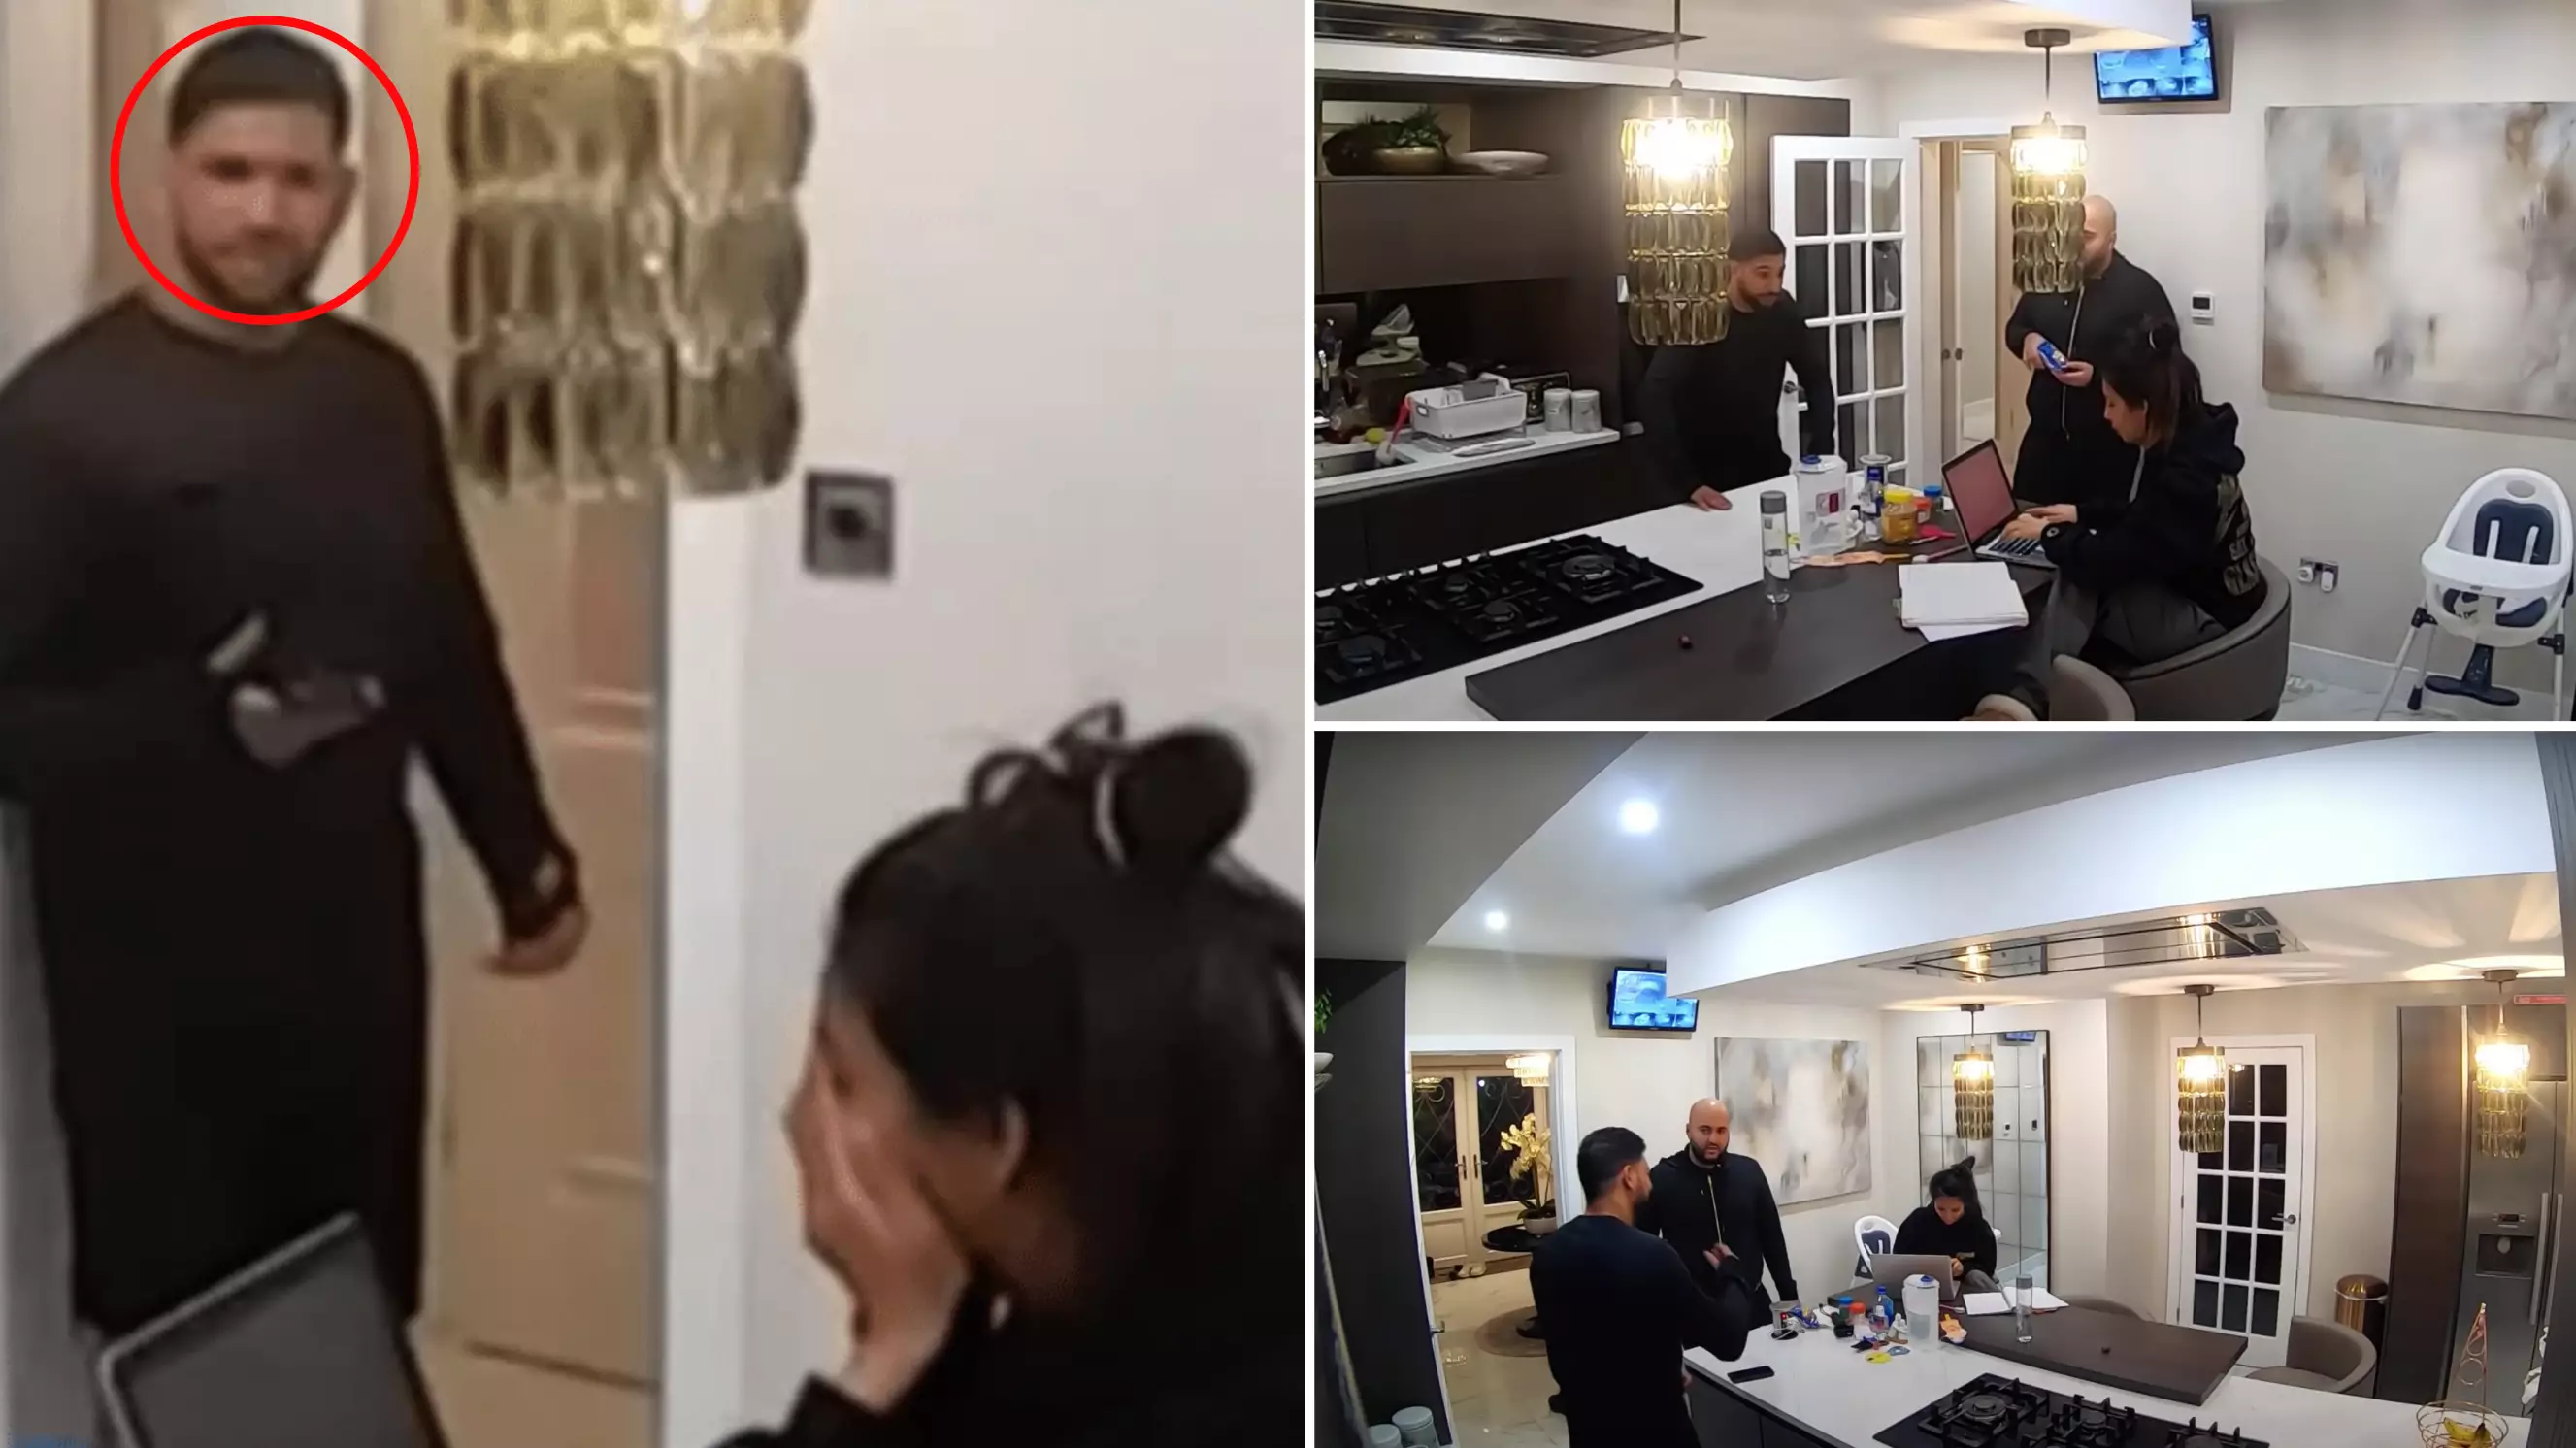 ​Amir Khan Tricked By His Wife In Hilarious £2 Million Prank